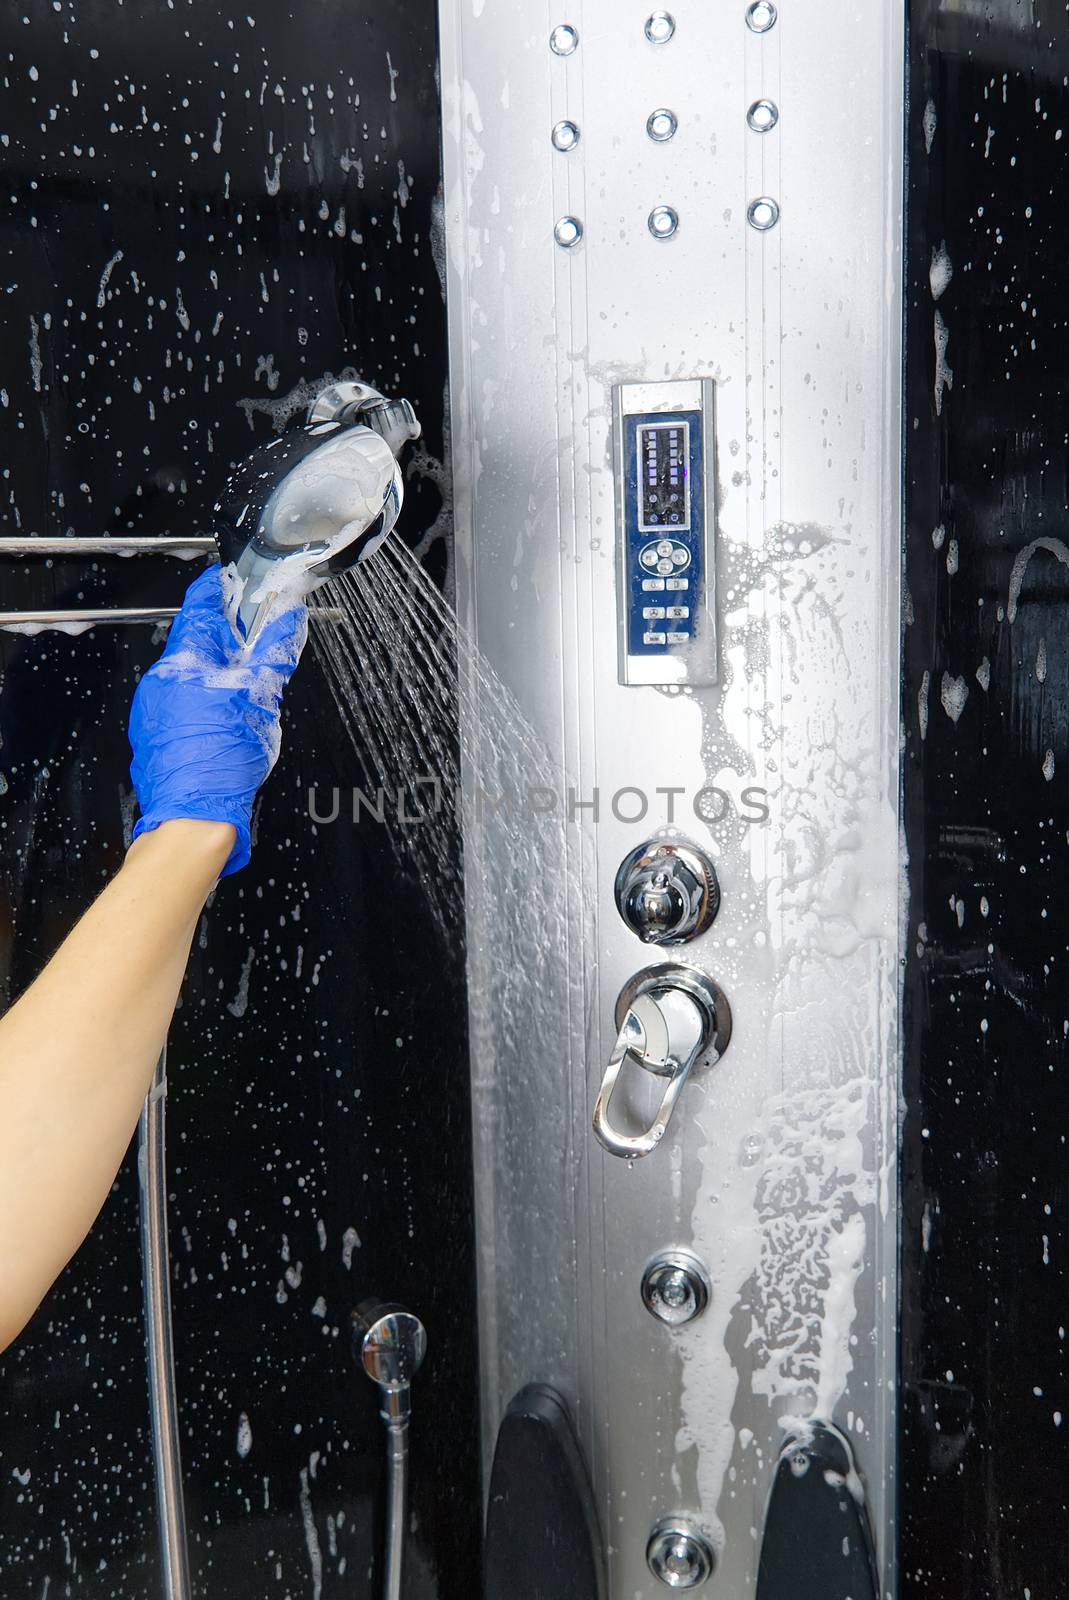 Cleaning of shower steam cabins from Calcium deposits. Cleaning in the bathroom. woman hand in blue gloves with rag and detergent, washing and polishing shower booth from Calcium stone. Maid or housewife cares about house. Commercial cleaning service company concept.